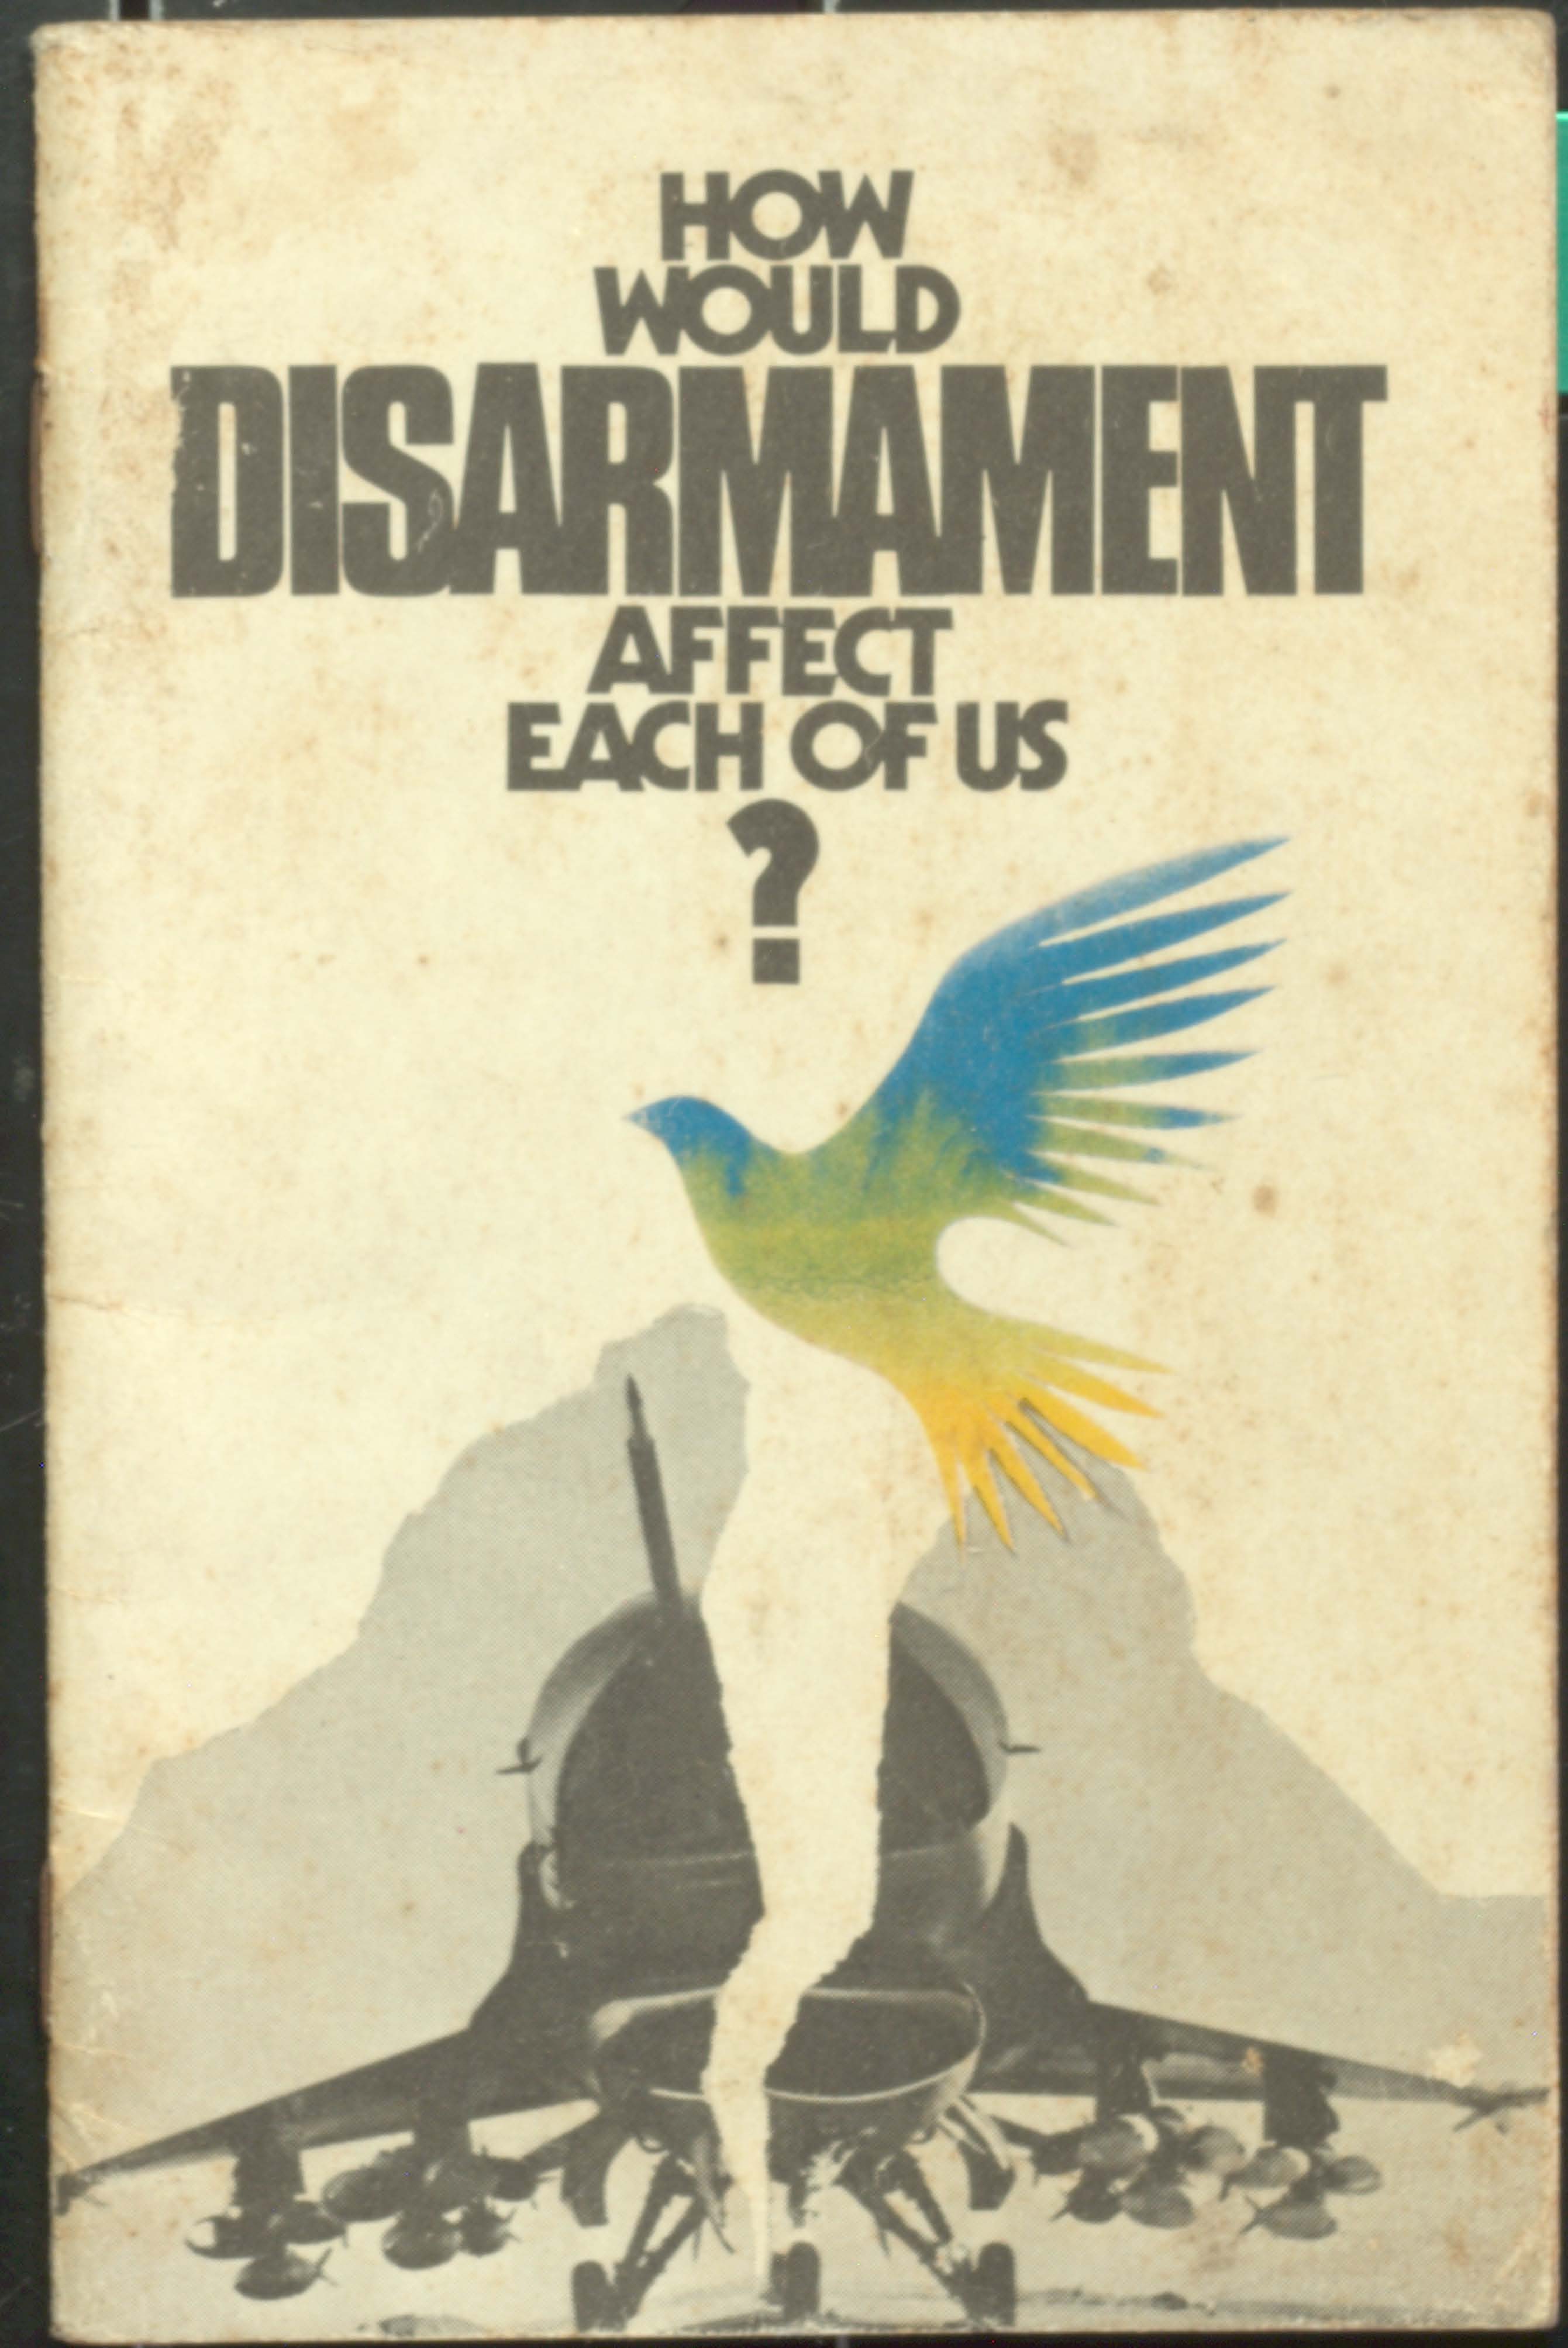 How Would Disarmament Affect Each Of Us?